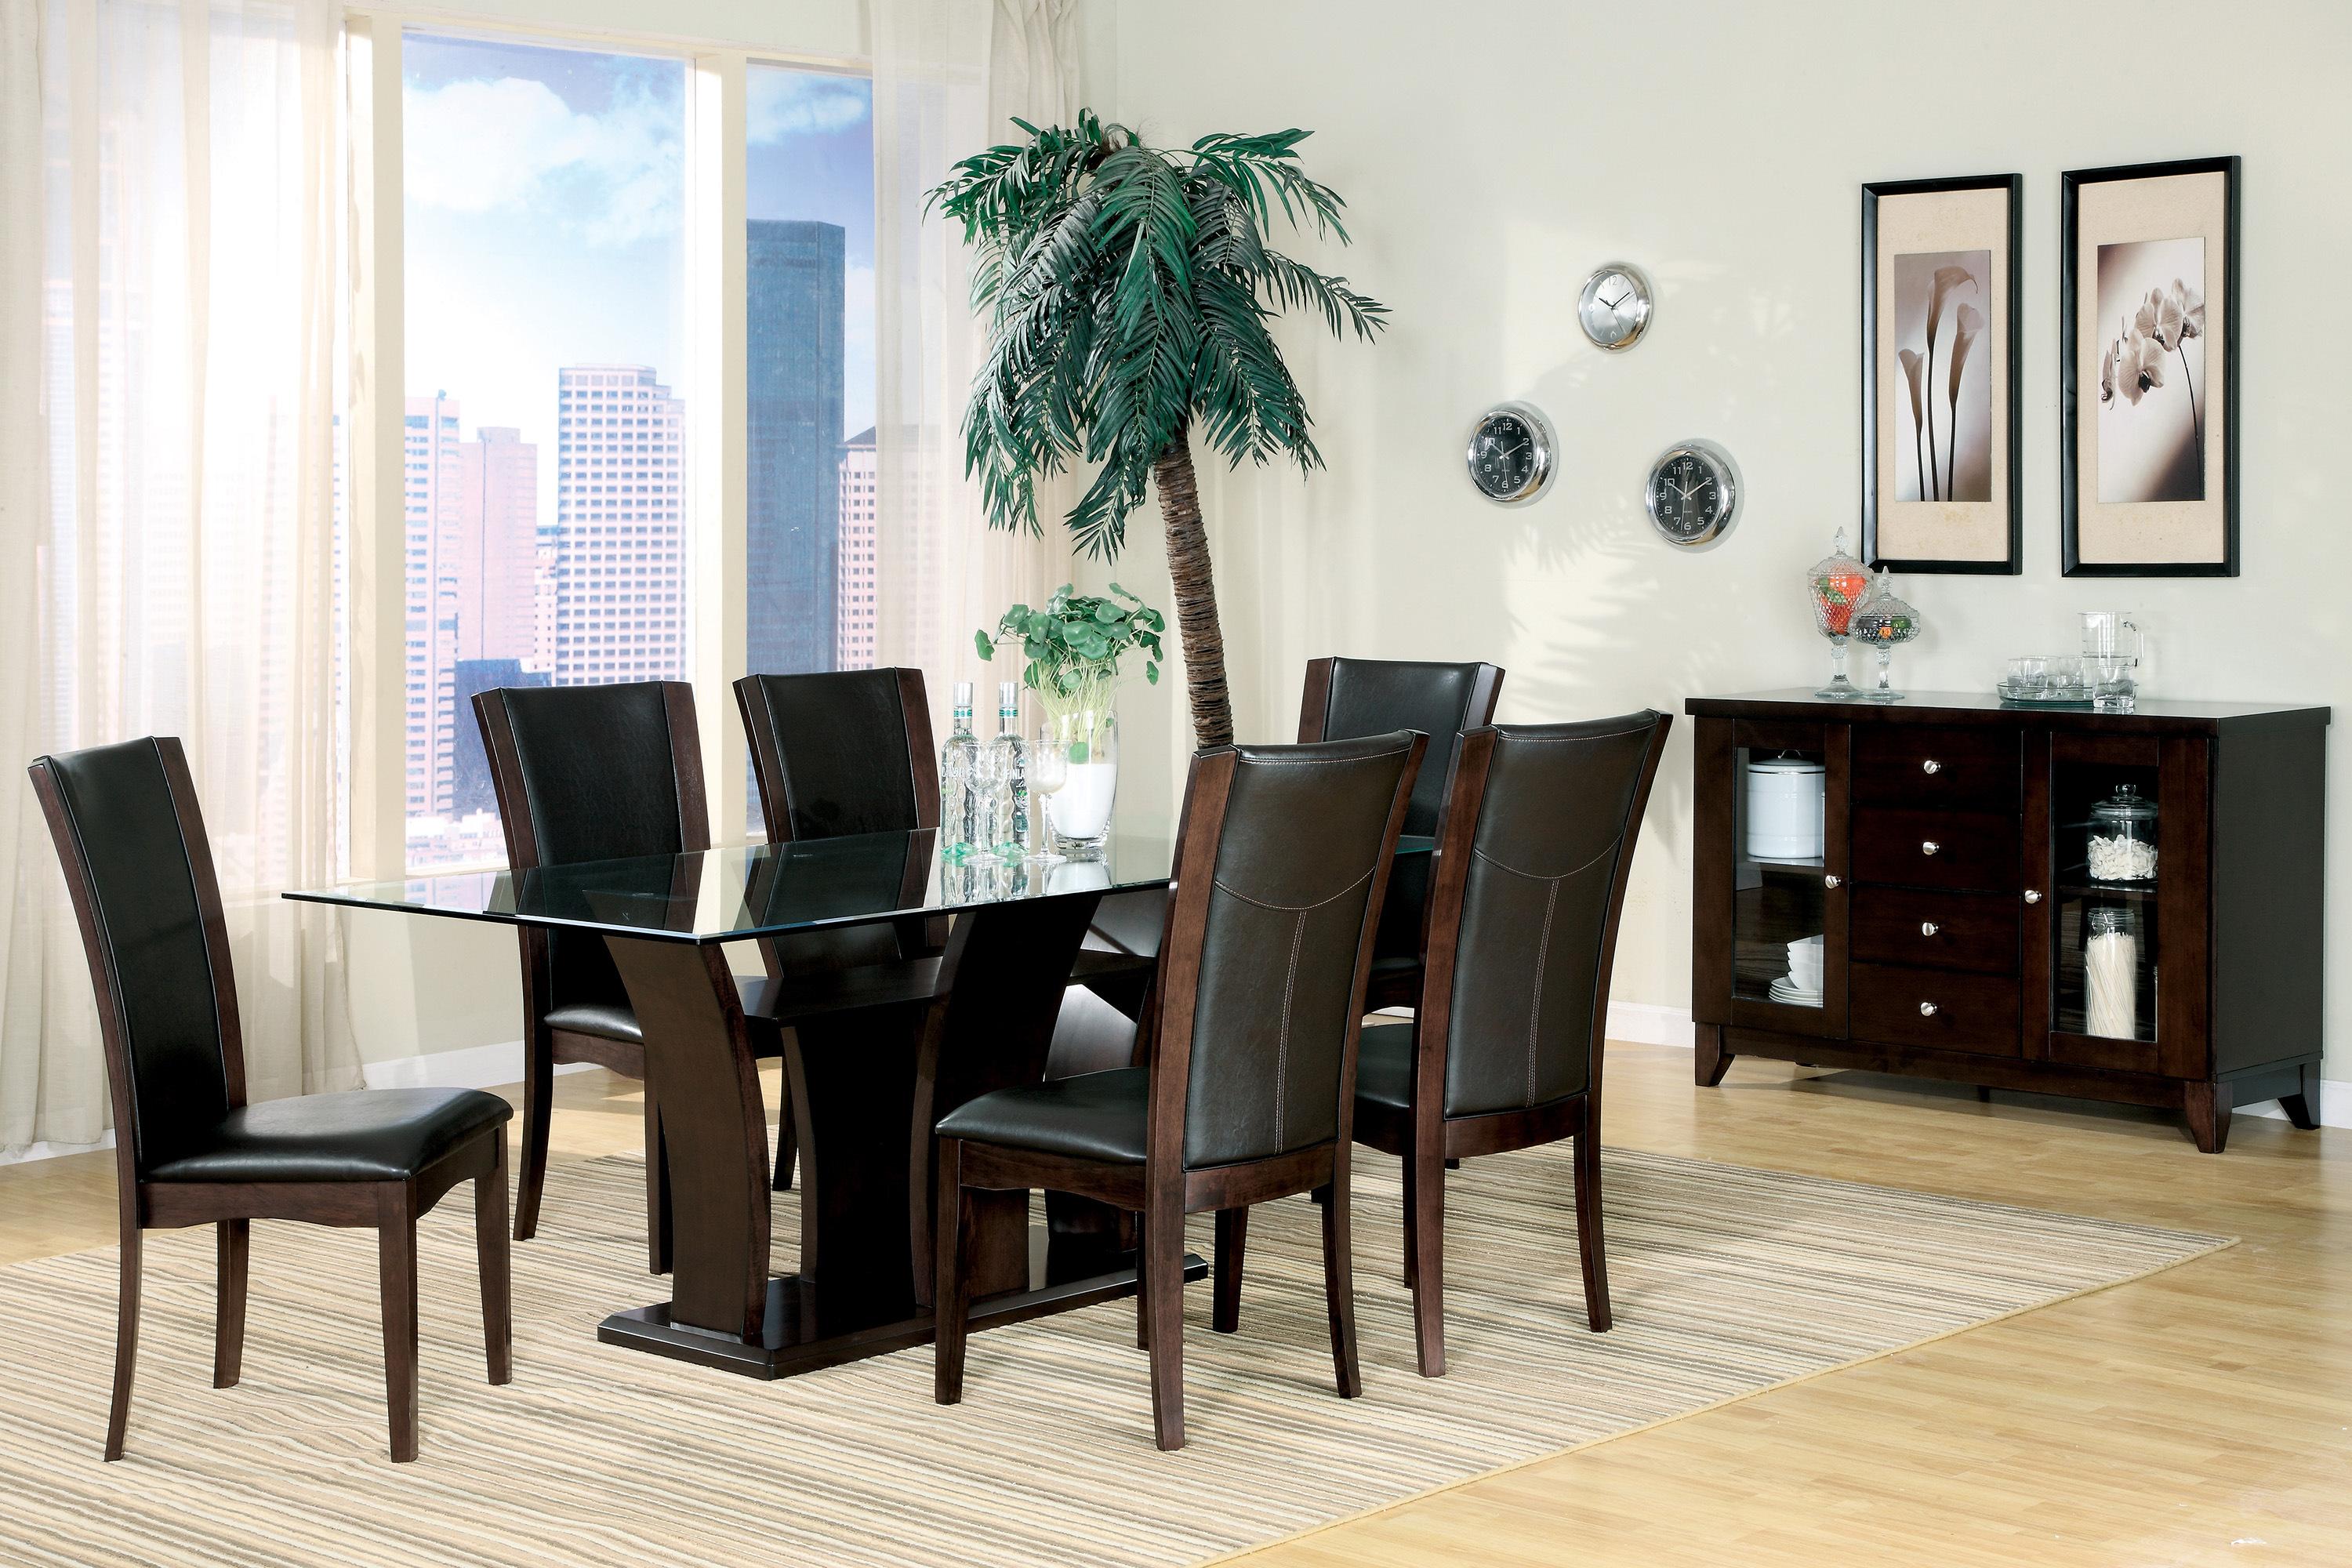 Contemporary Dining Room Set 710-72-8PC Daisy 710-72-8PC in Espresso, Brown Faux Leather